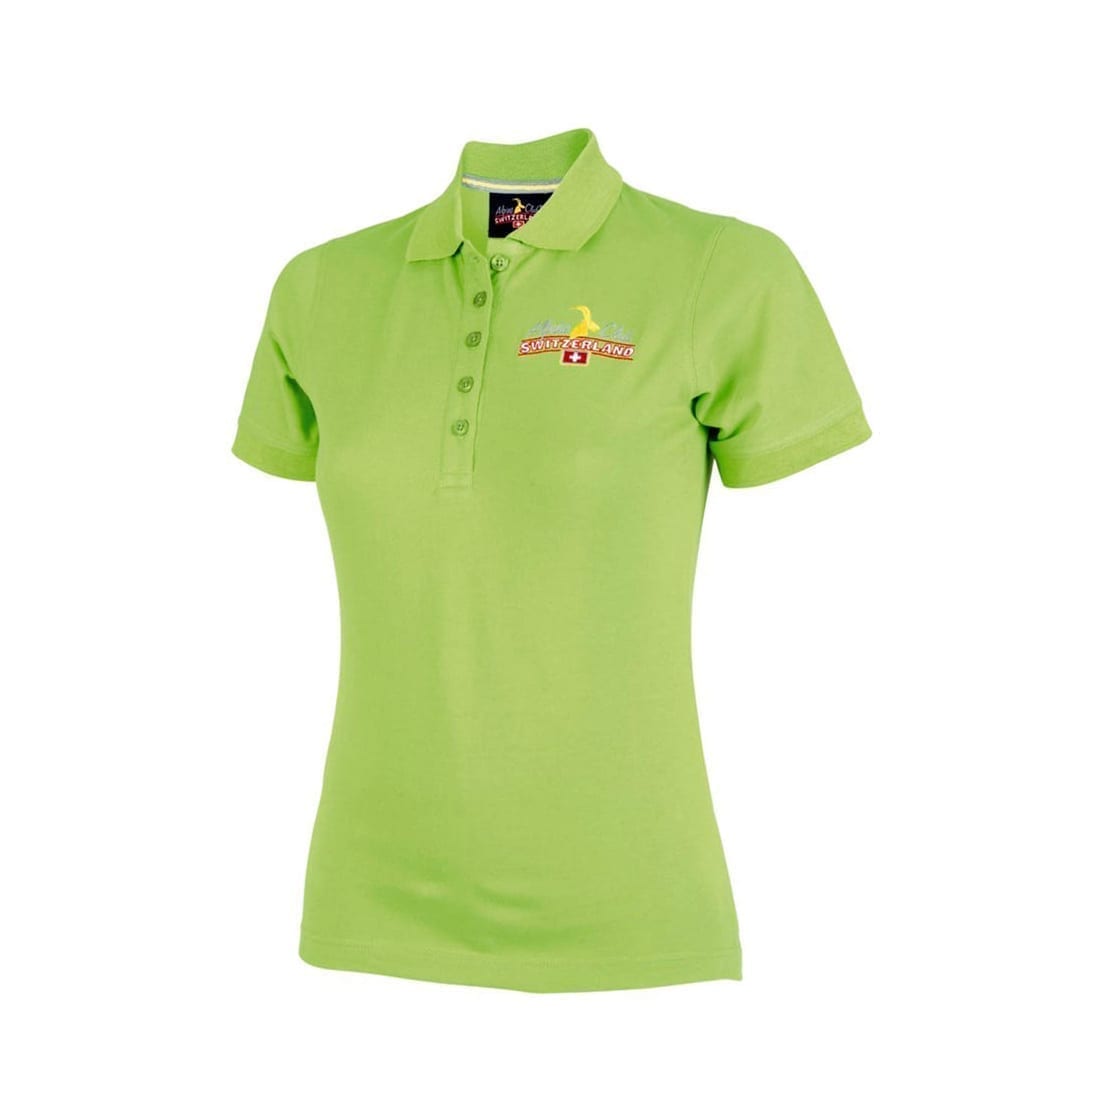 p 11002 Polo shirt for woman fast drying fitting green